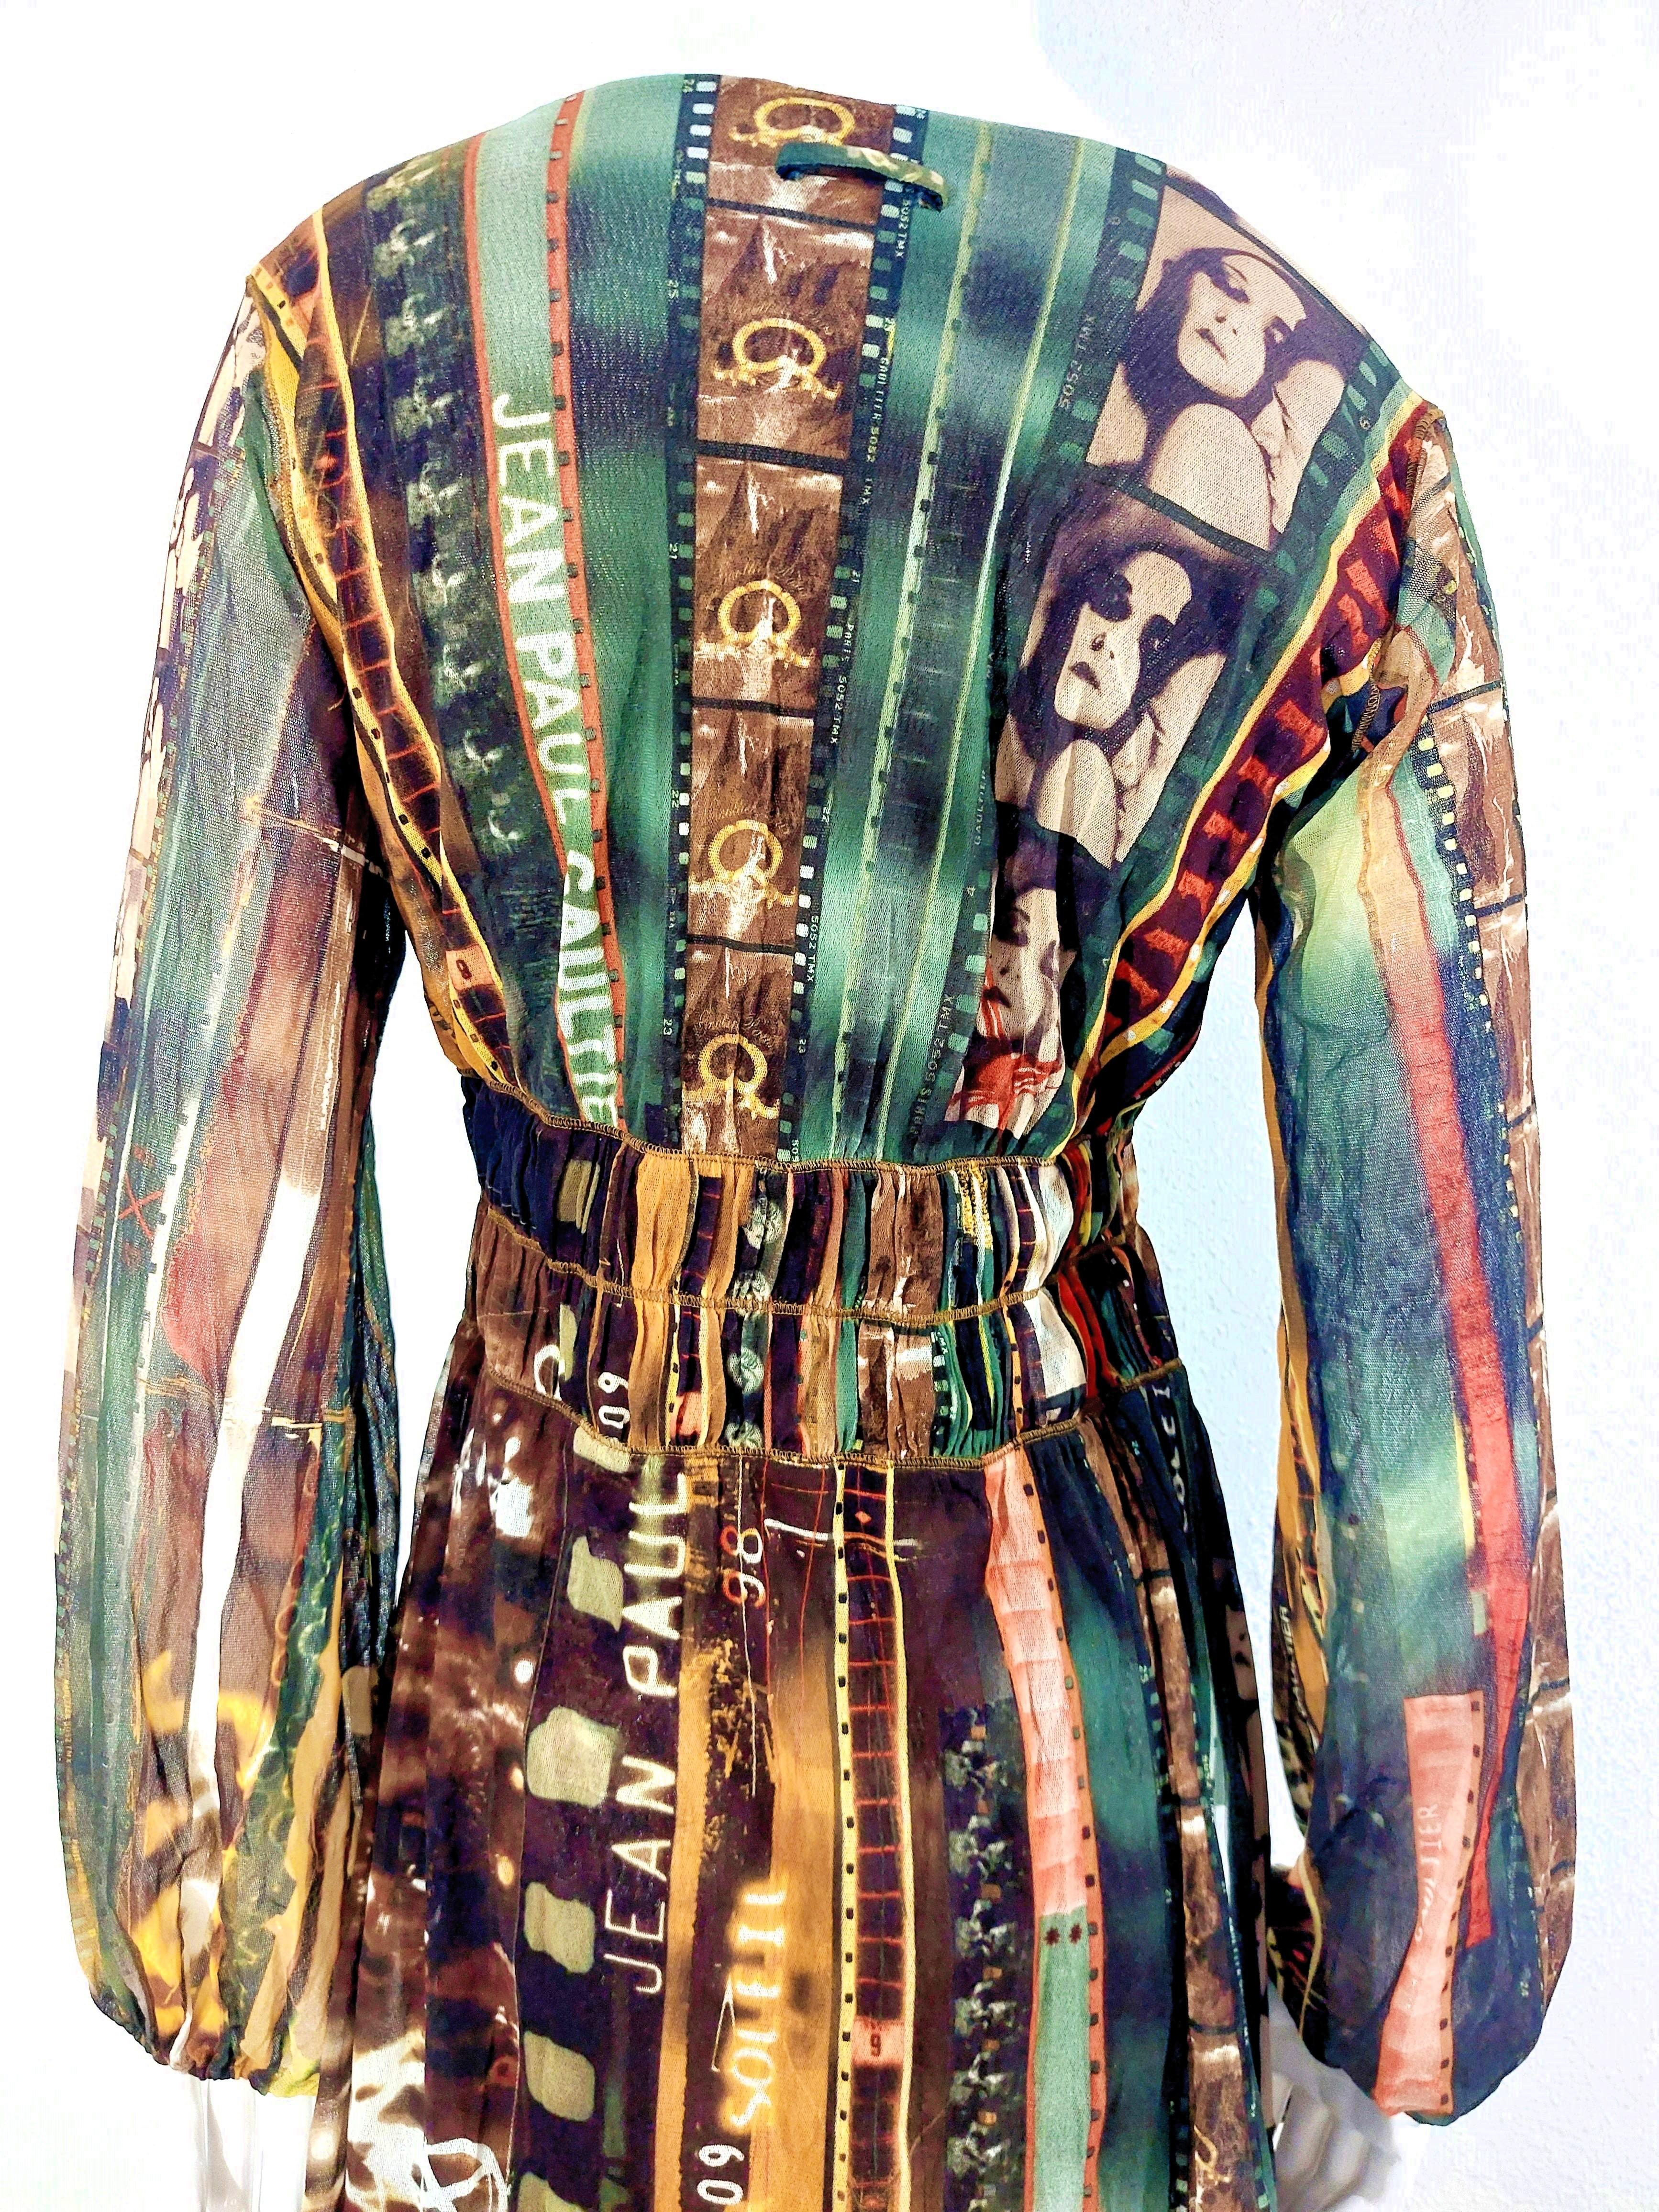 Jean Paul Gaultier Faces Silhouettes Paris Cinema Transaprent Mesh Dress 

“Dressing is a pleasure; clothes are not a joke.”
— Jean Paul Gaultier

Everything Jean Paul Gaultier does tends toward the luxury market.
His clothes are expensive. You have